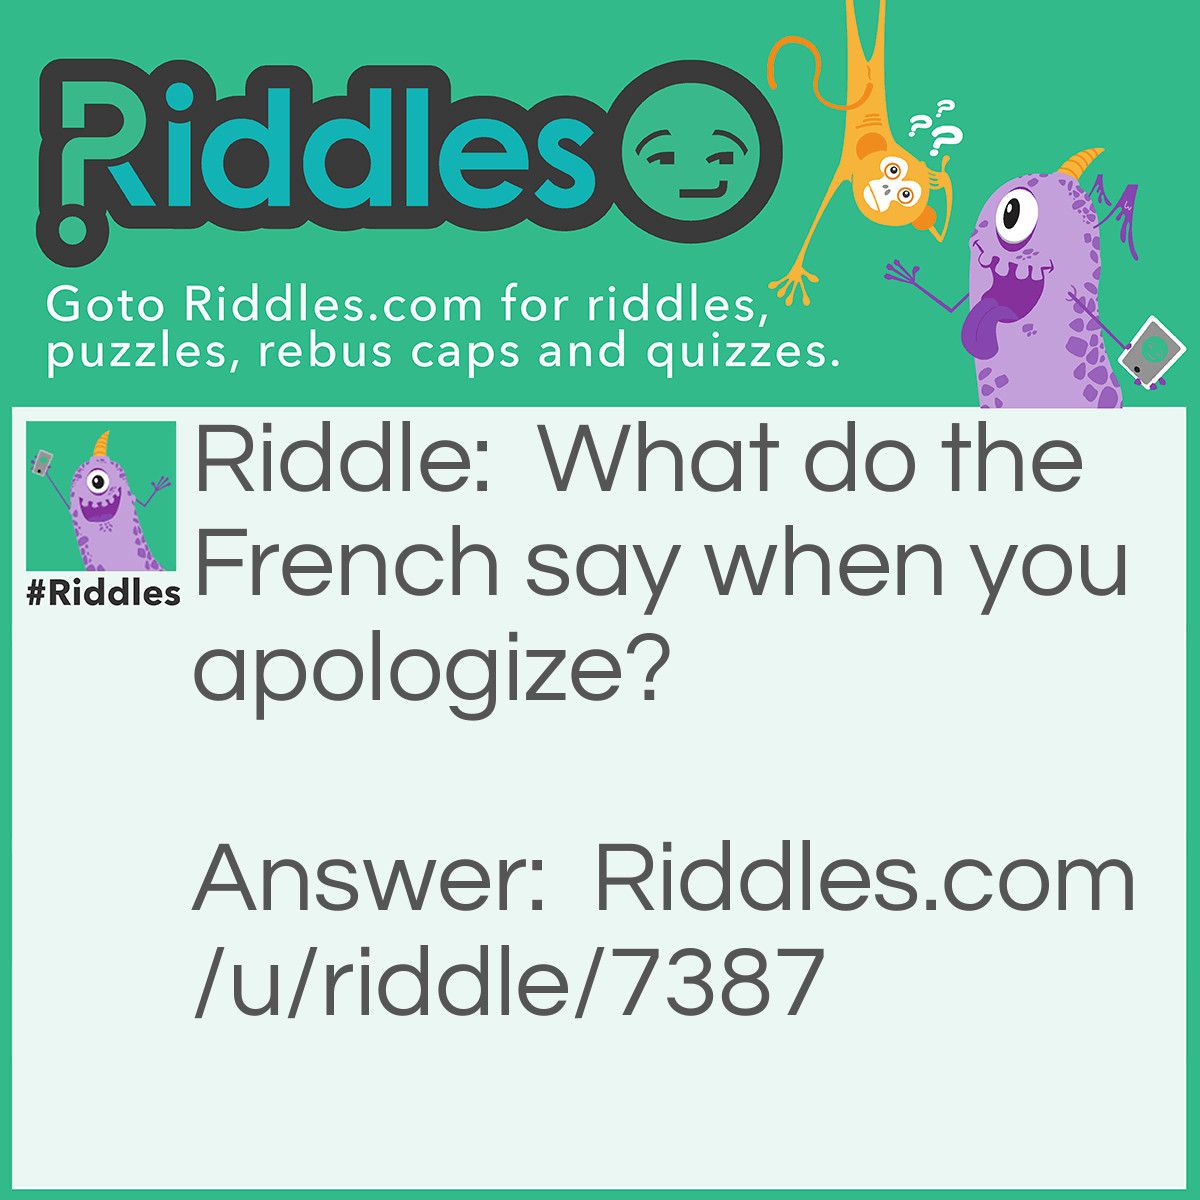 Riddle: What do the French say when you apologize? Answer: "Baguette" about it.